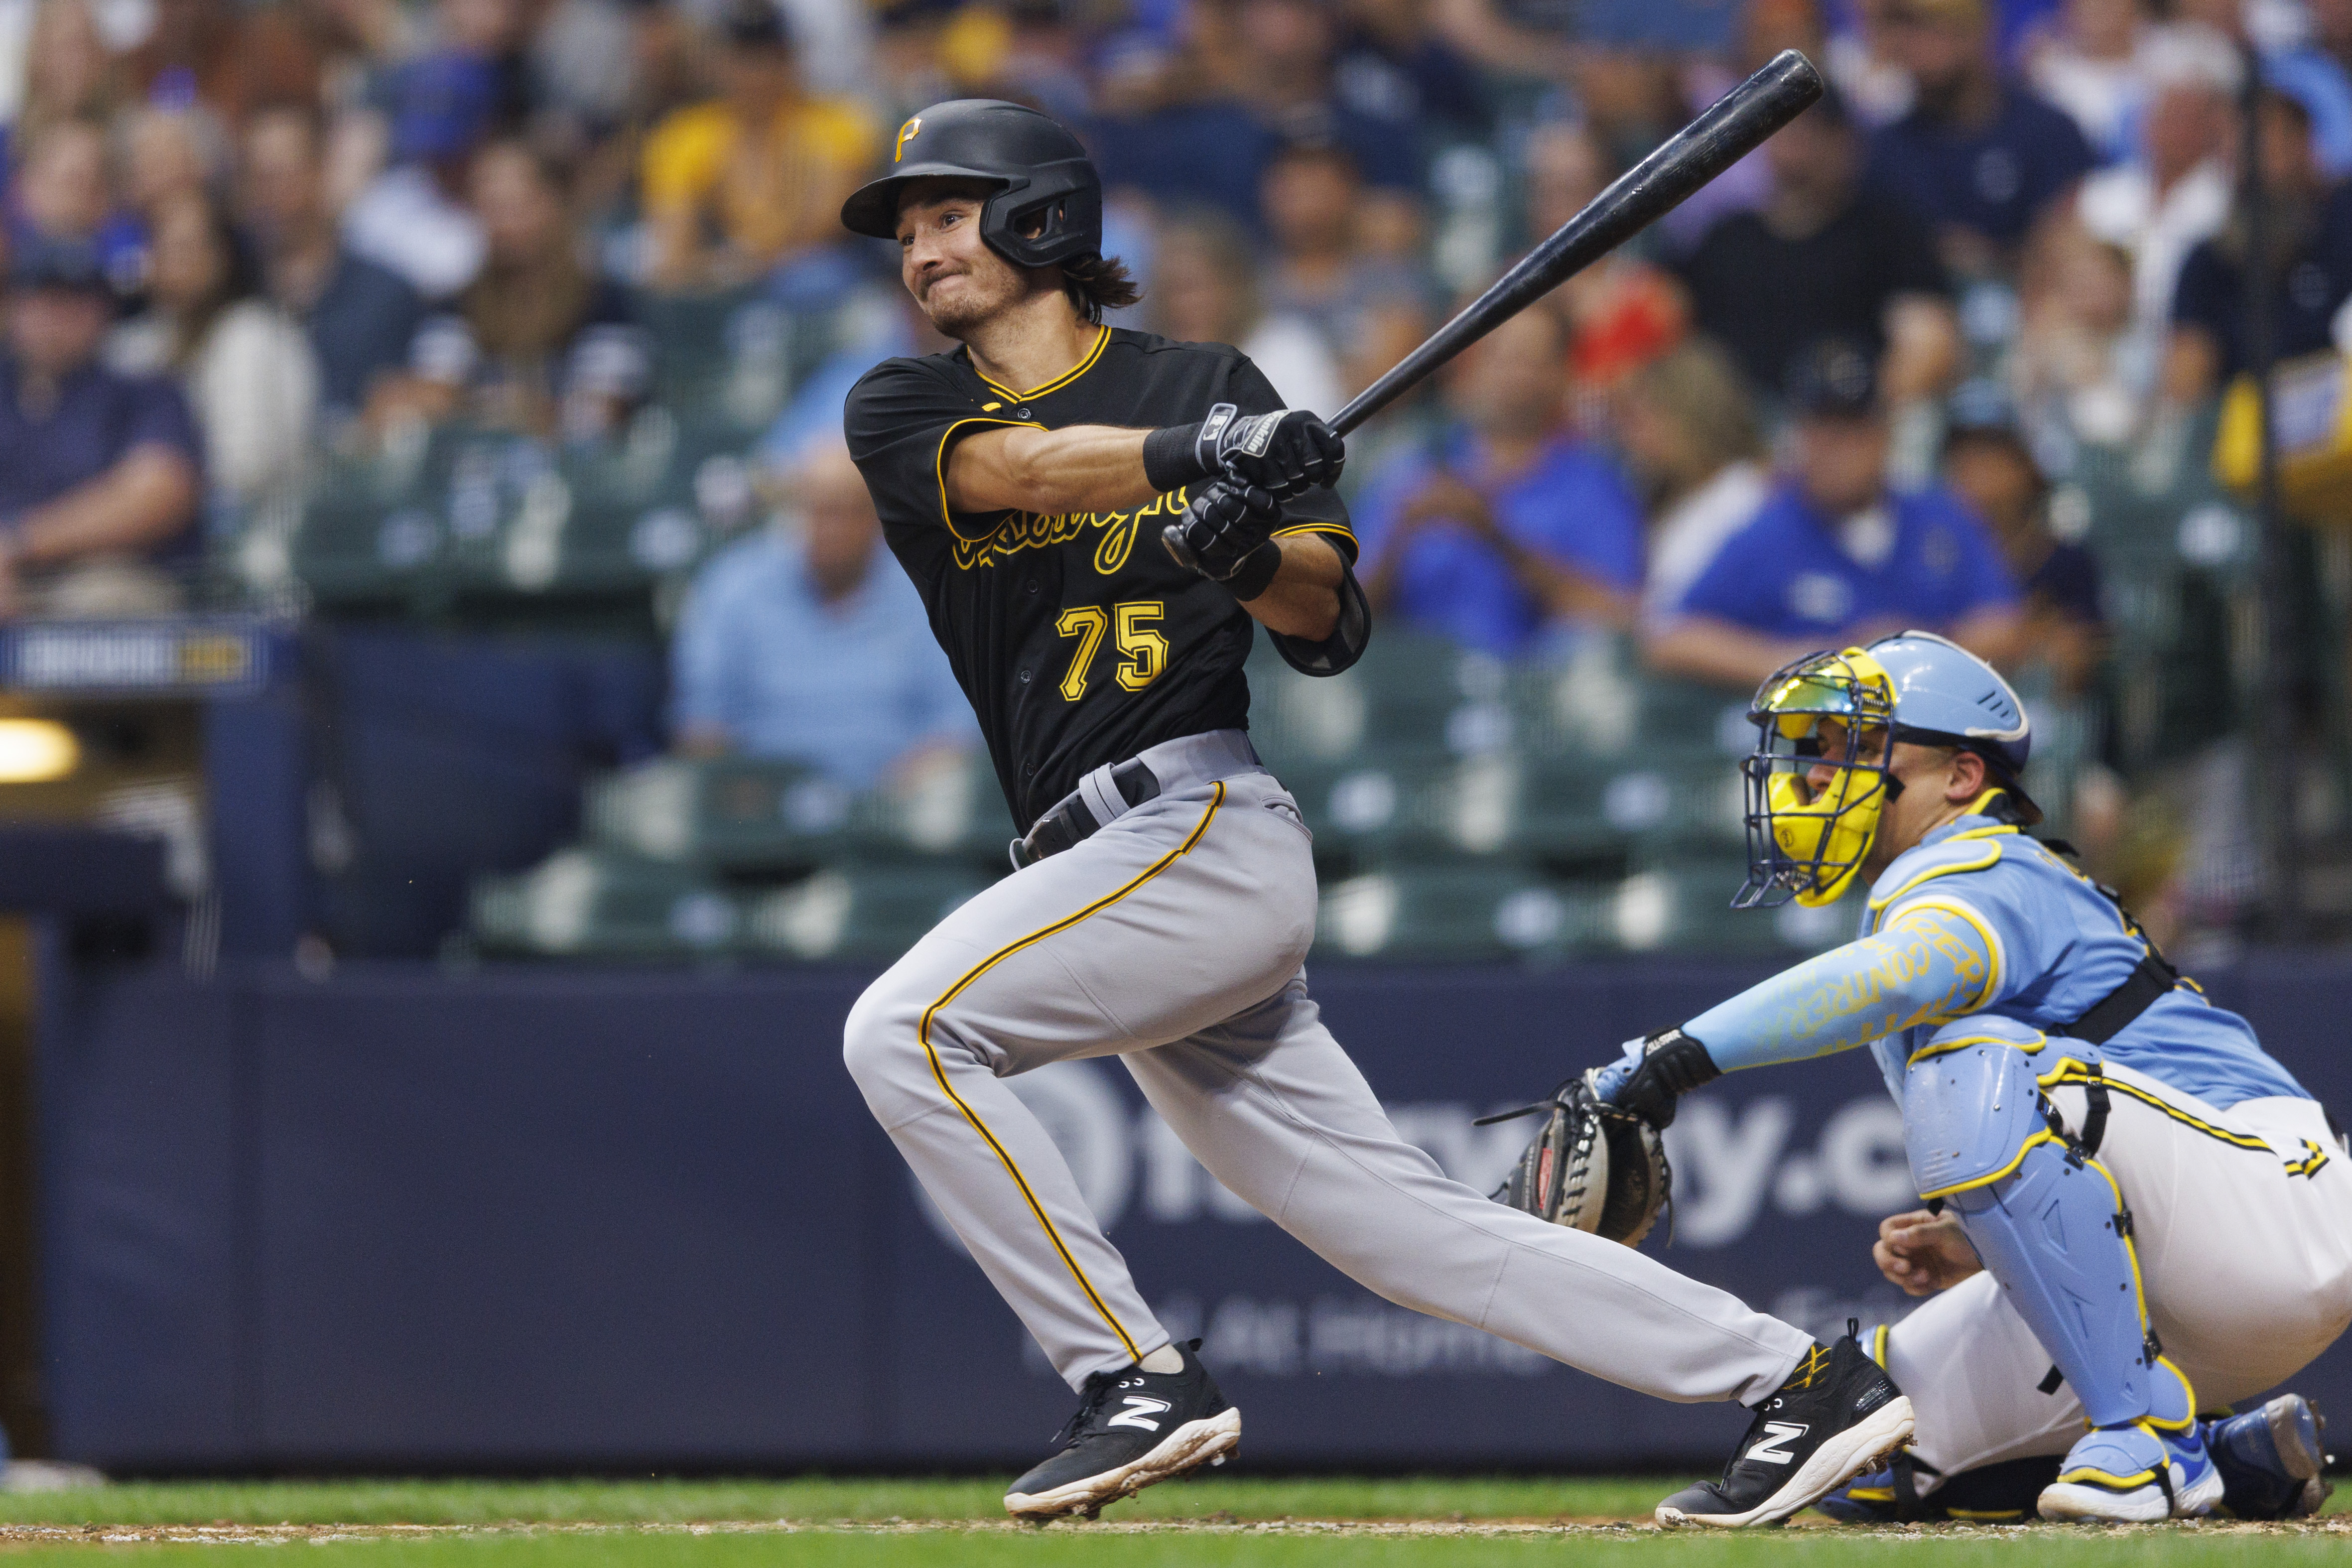 Alfonso Rivas and Bryan Reynolds deliver Pirates to 8-4 win over Brewers